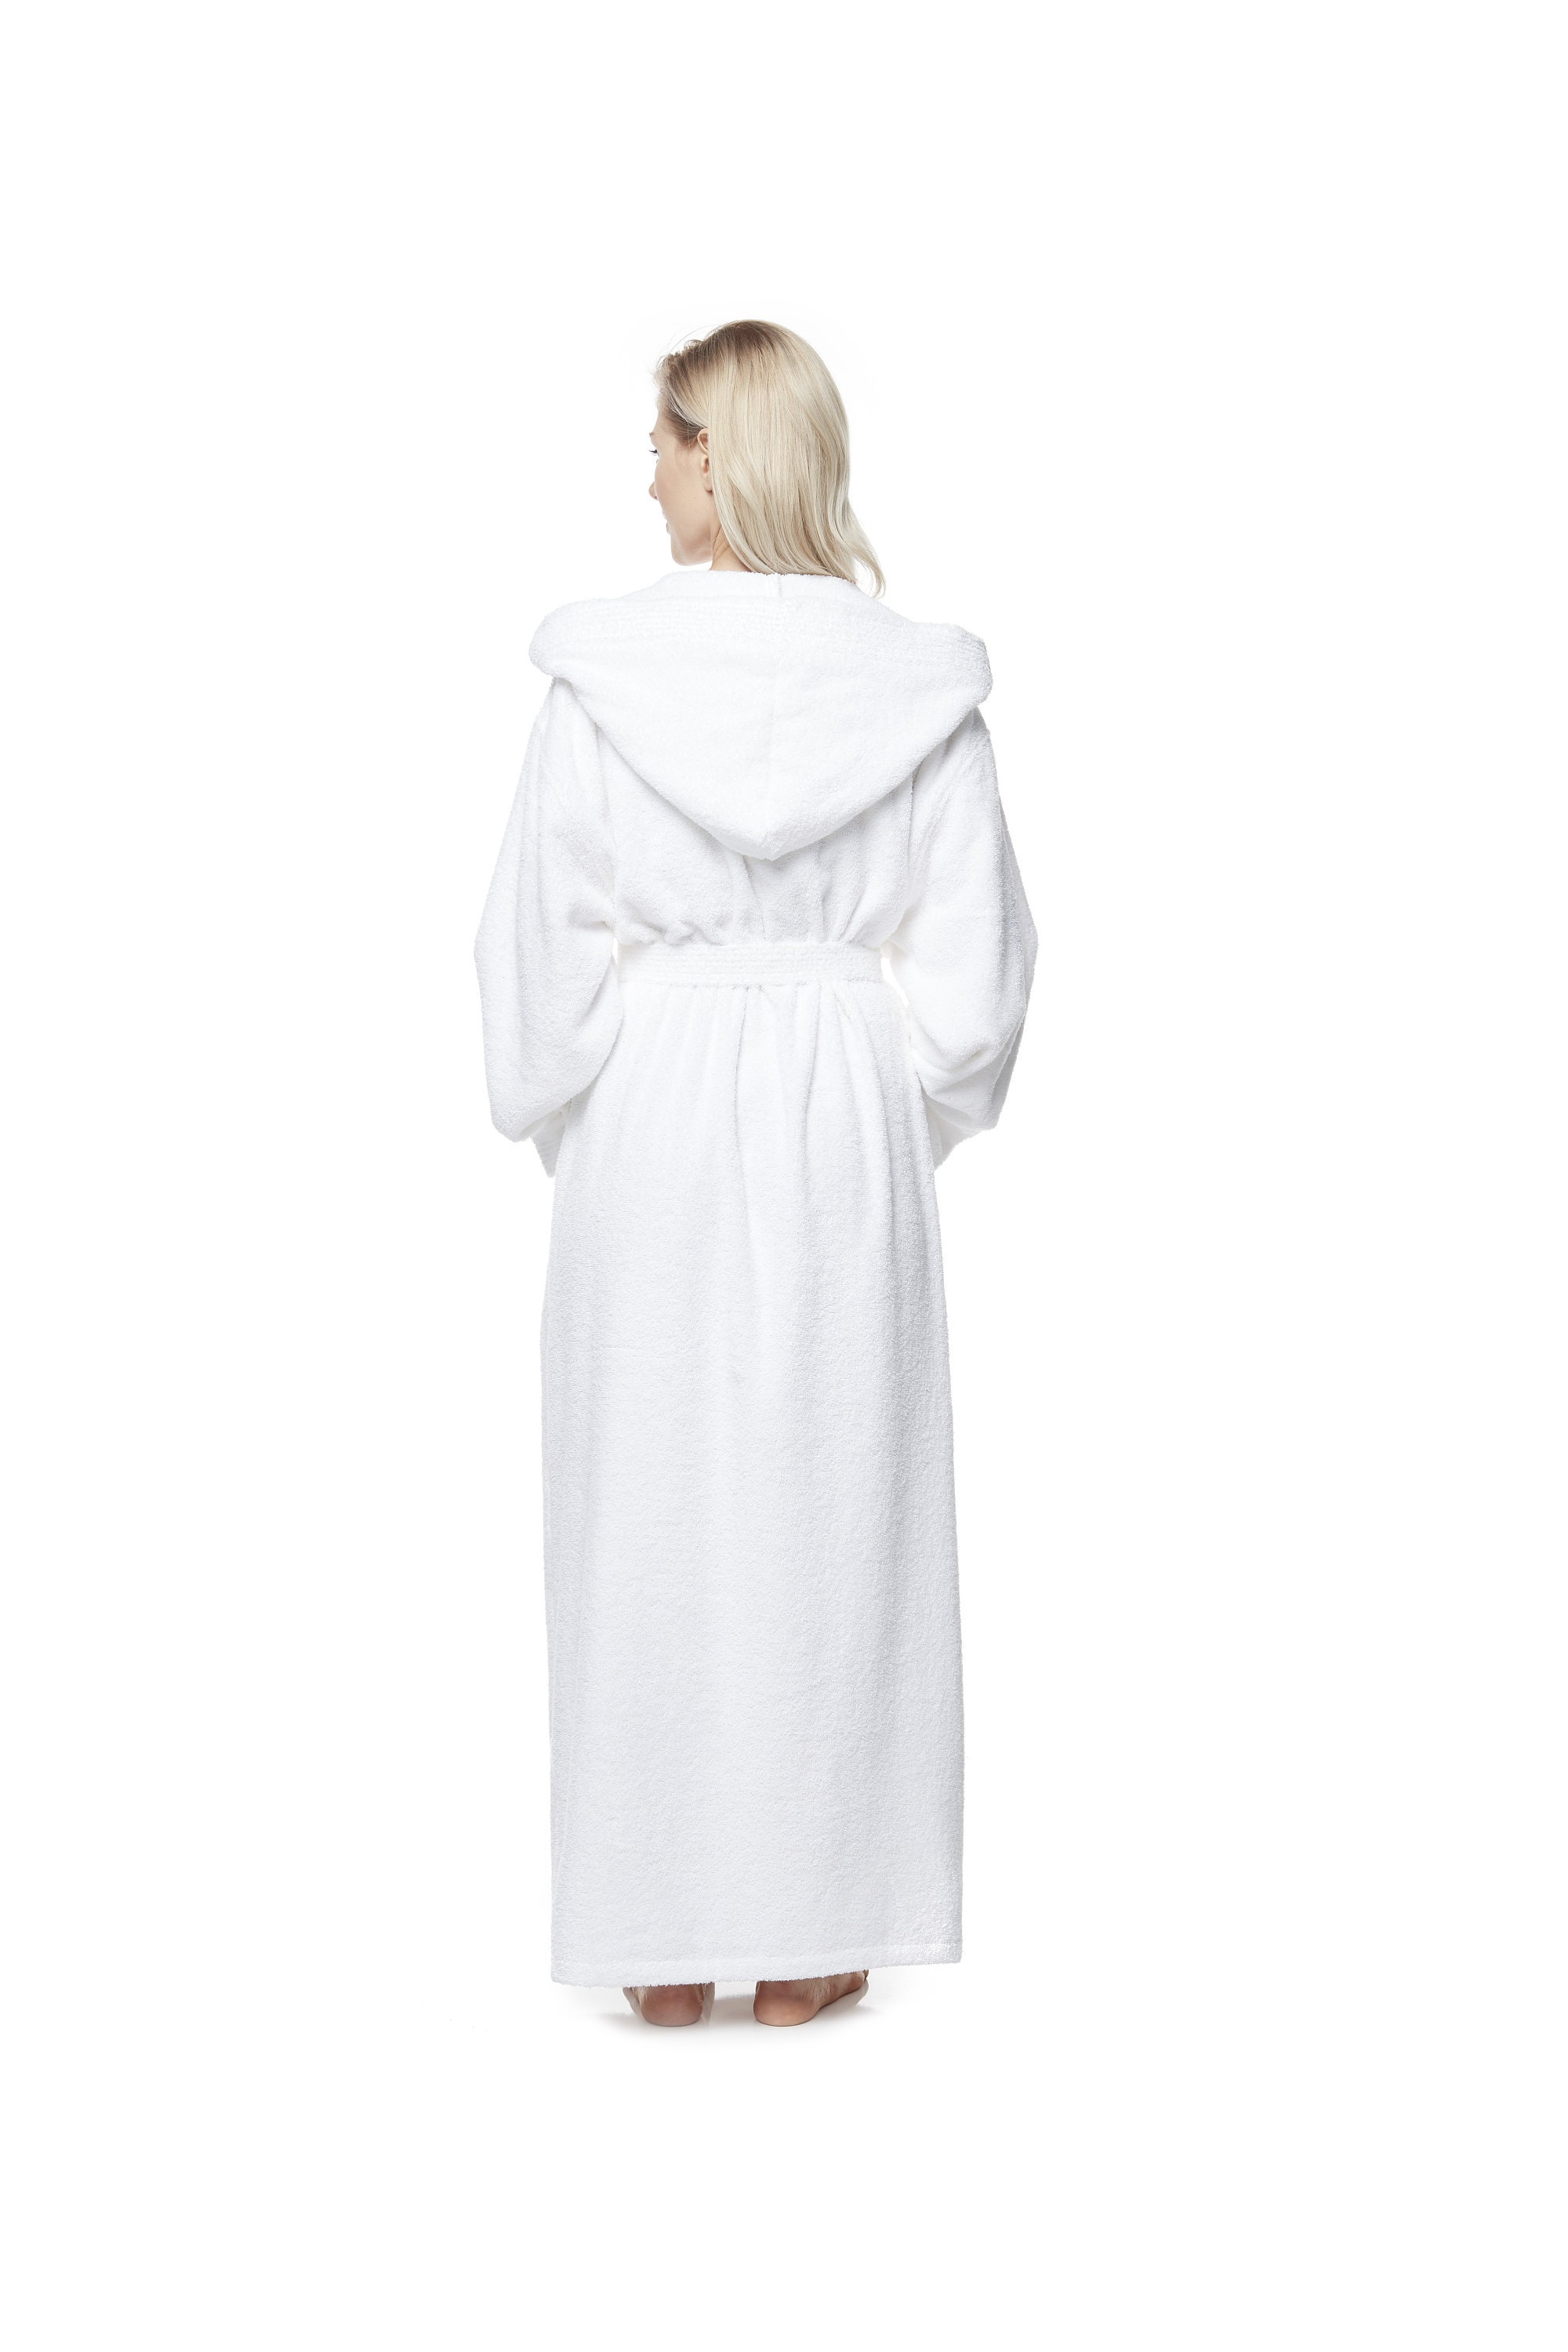 Fishers Finery Womens Premier Turkish Style Terry Spa Robe; Ultra